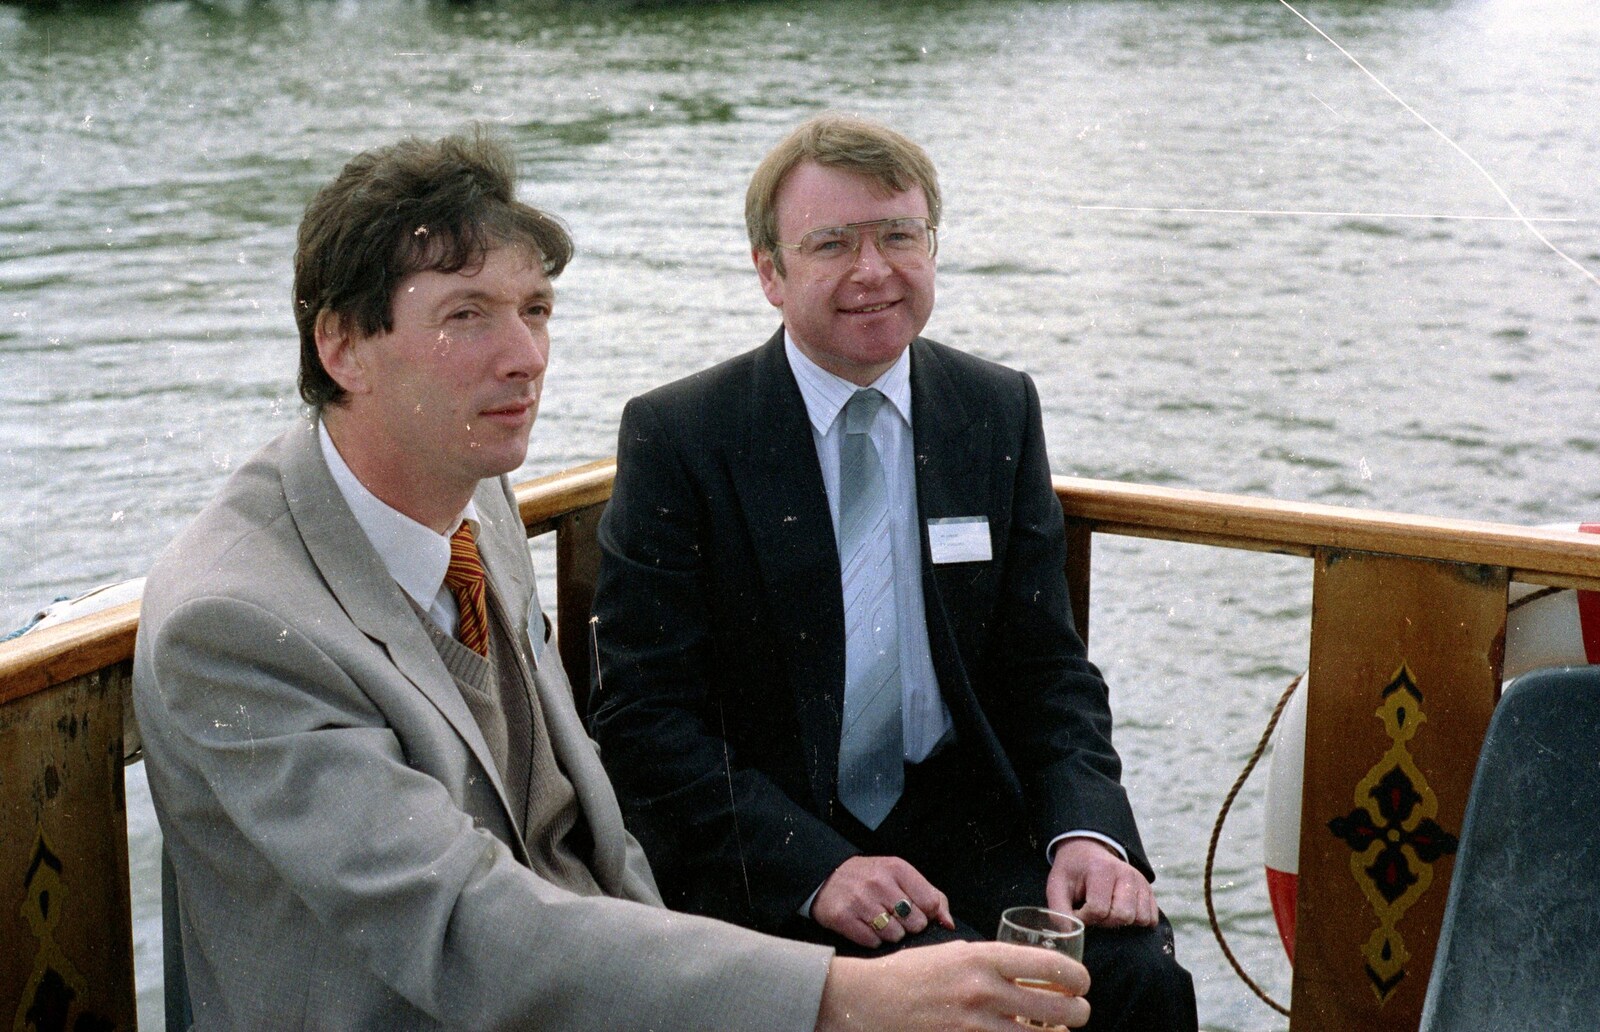 On the back of the boat from A Soman-Wherry Press Boat Trip, Horning, The Broads, Norfolk - 8th May 1988